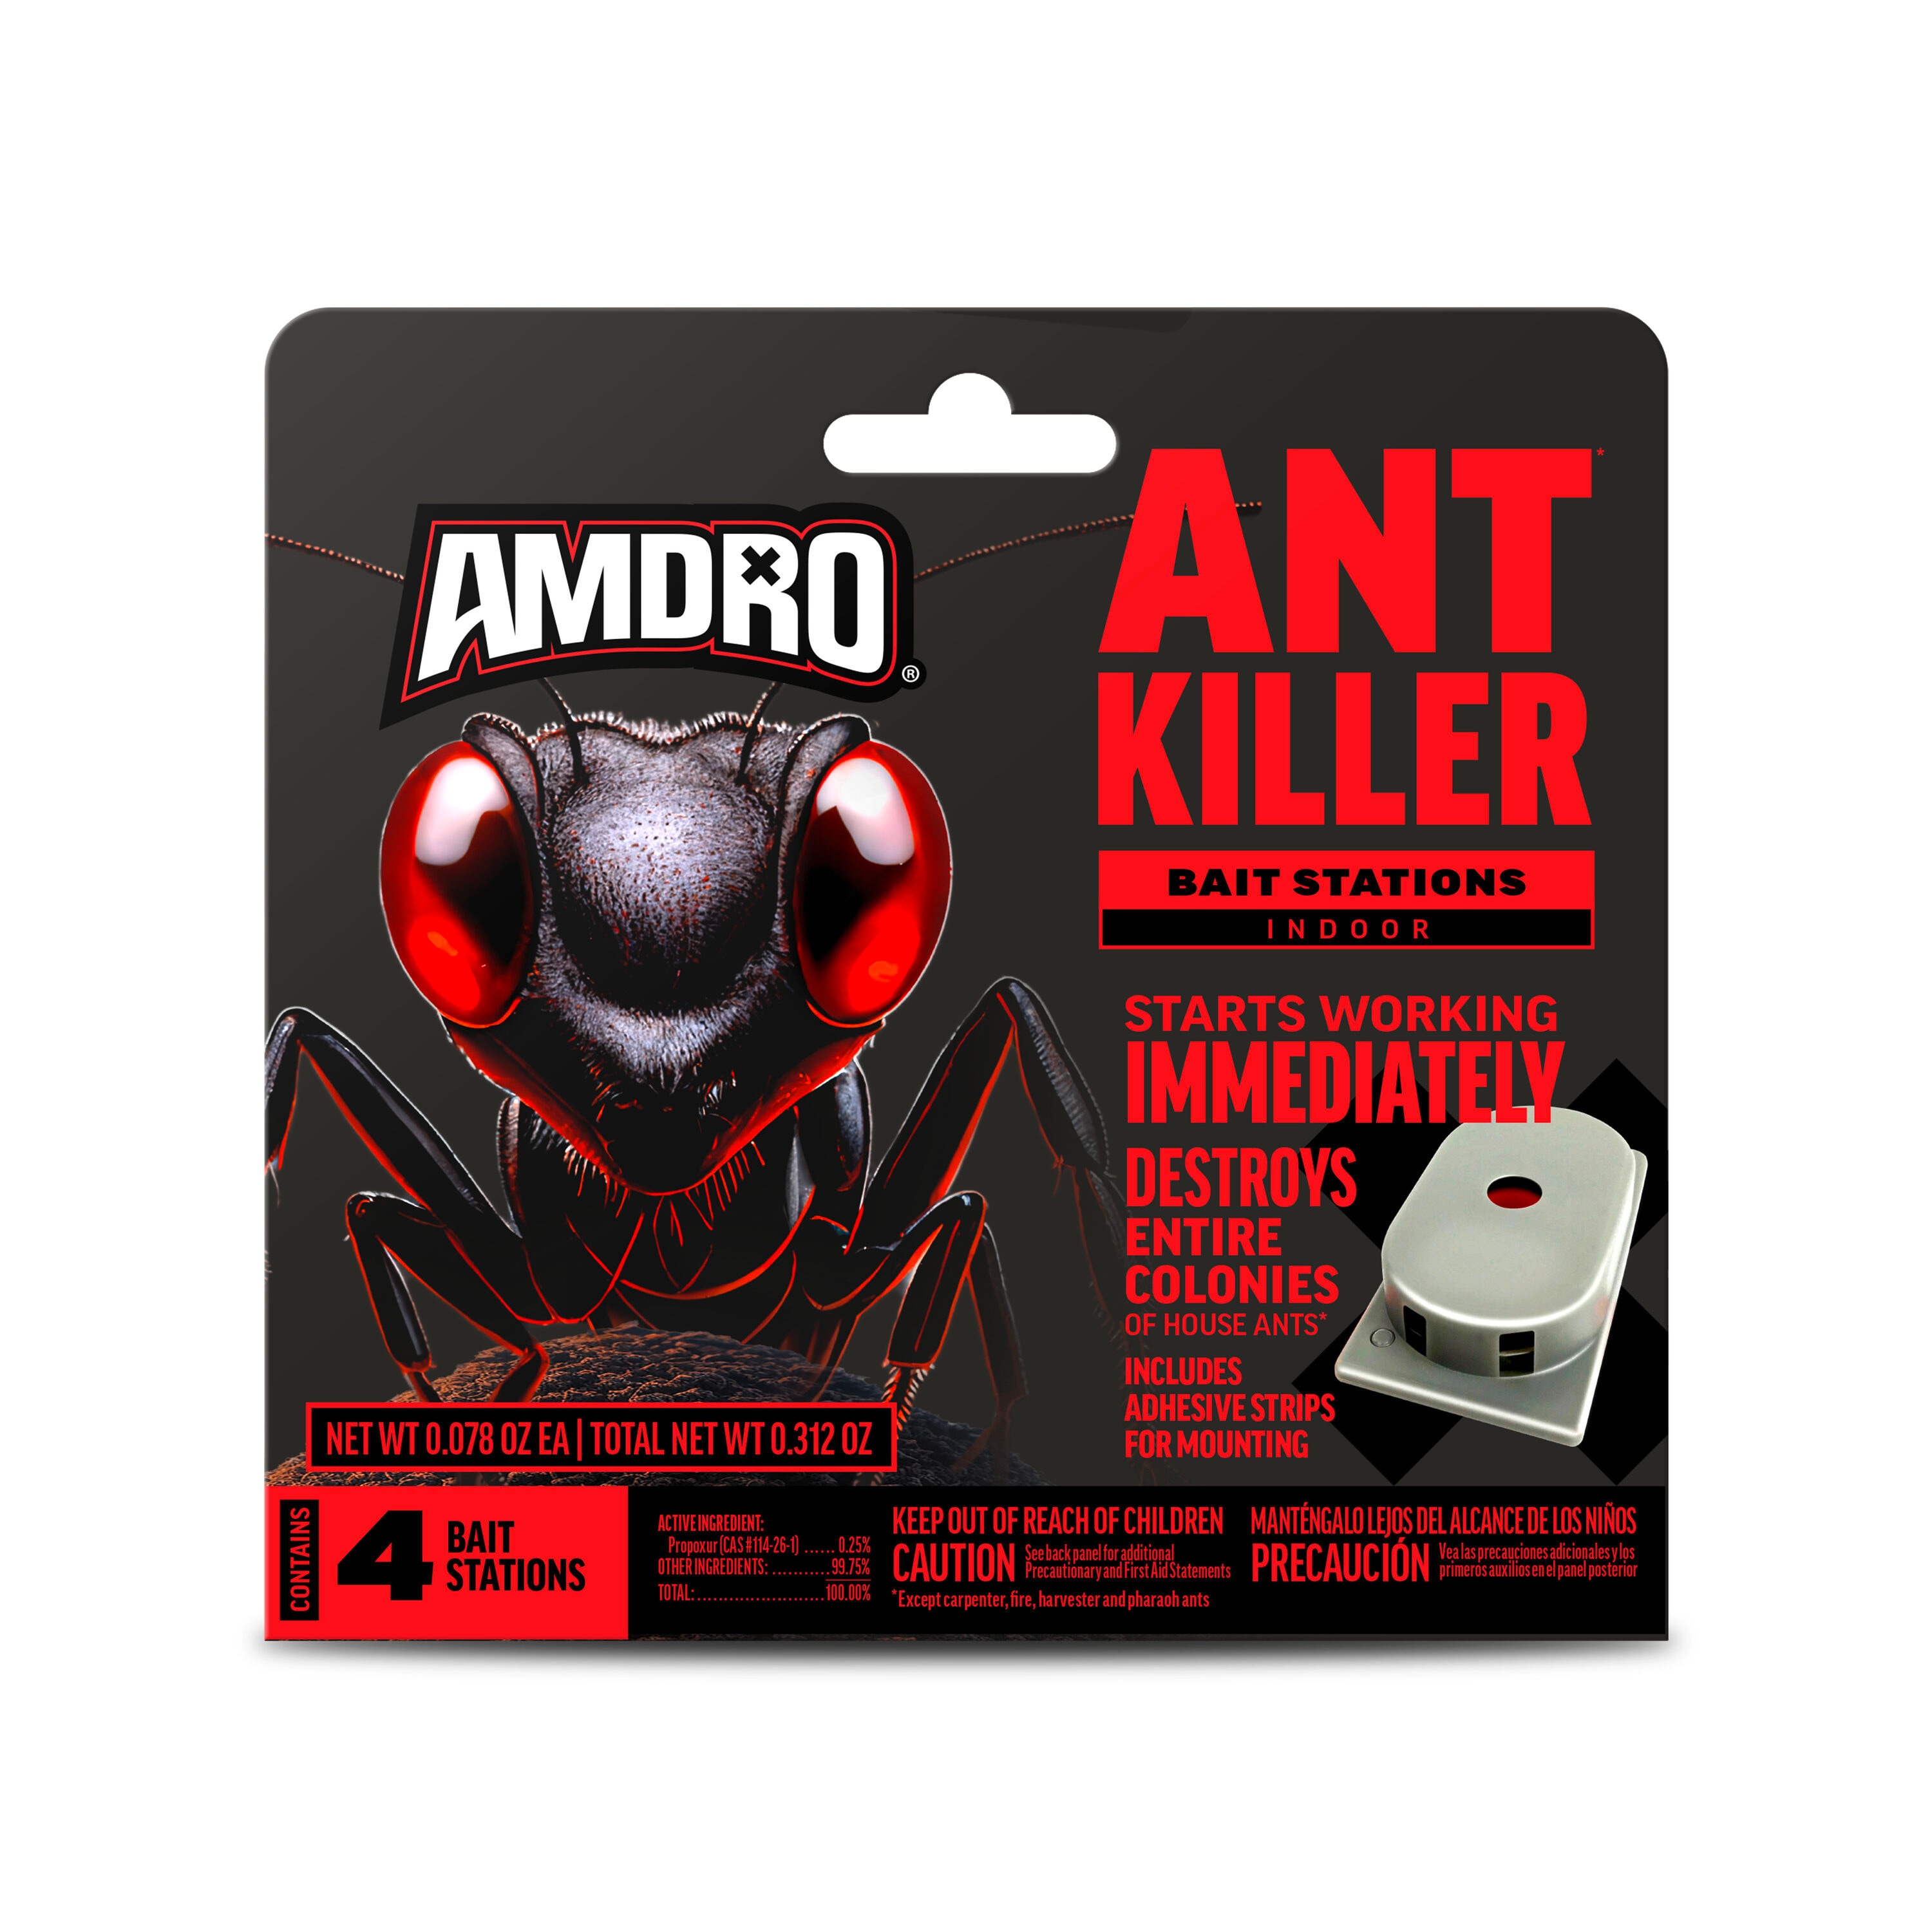 Ant bait station Insect & Pest Control at